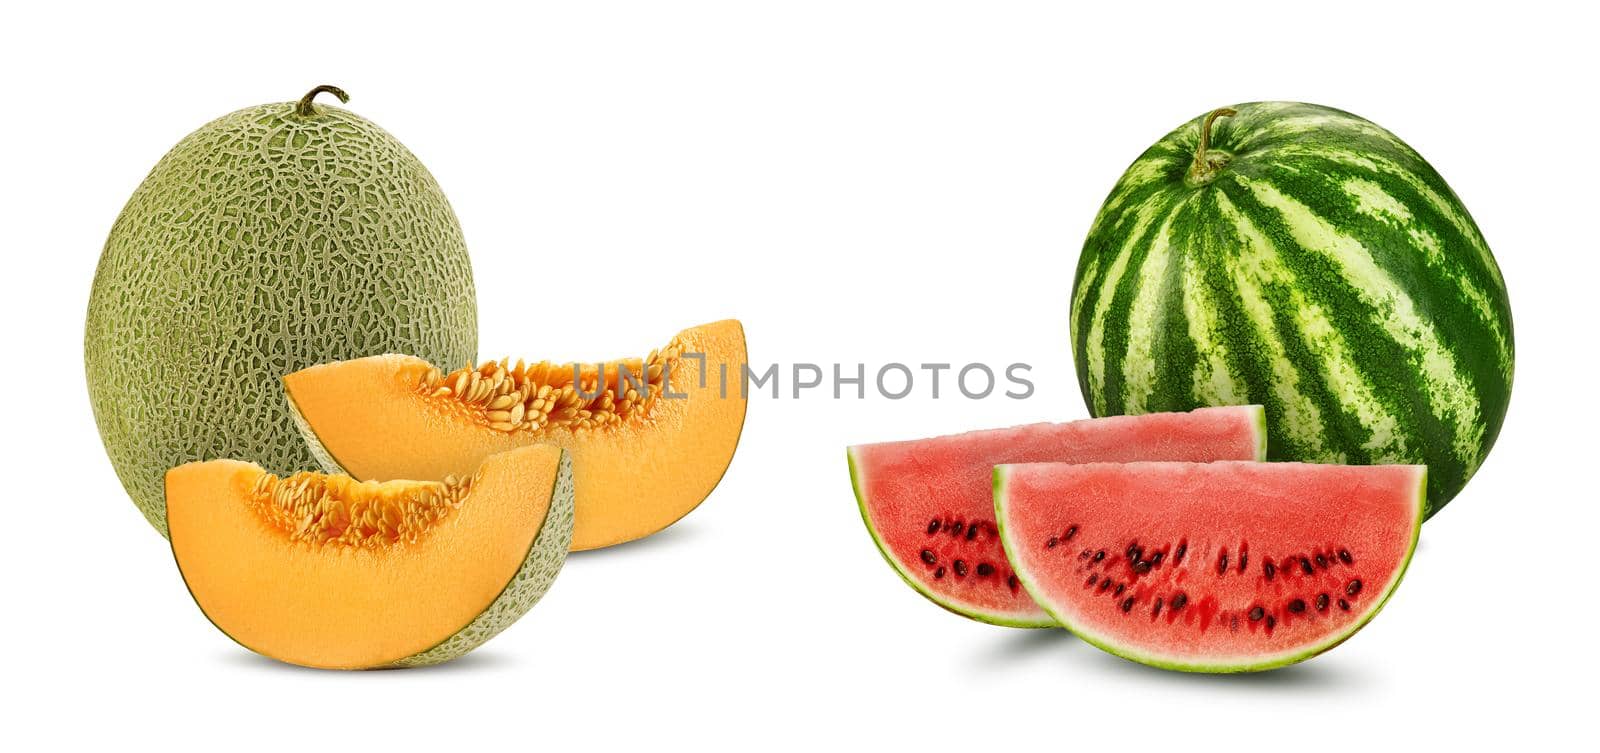 Green watermelon and cantaloupe melon with slices in a cross-section, isolated on white. Mellow red and yellow flesh with seeds. Close-up shot. by nazarovsergey